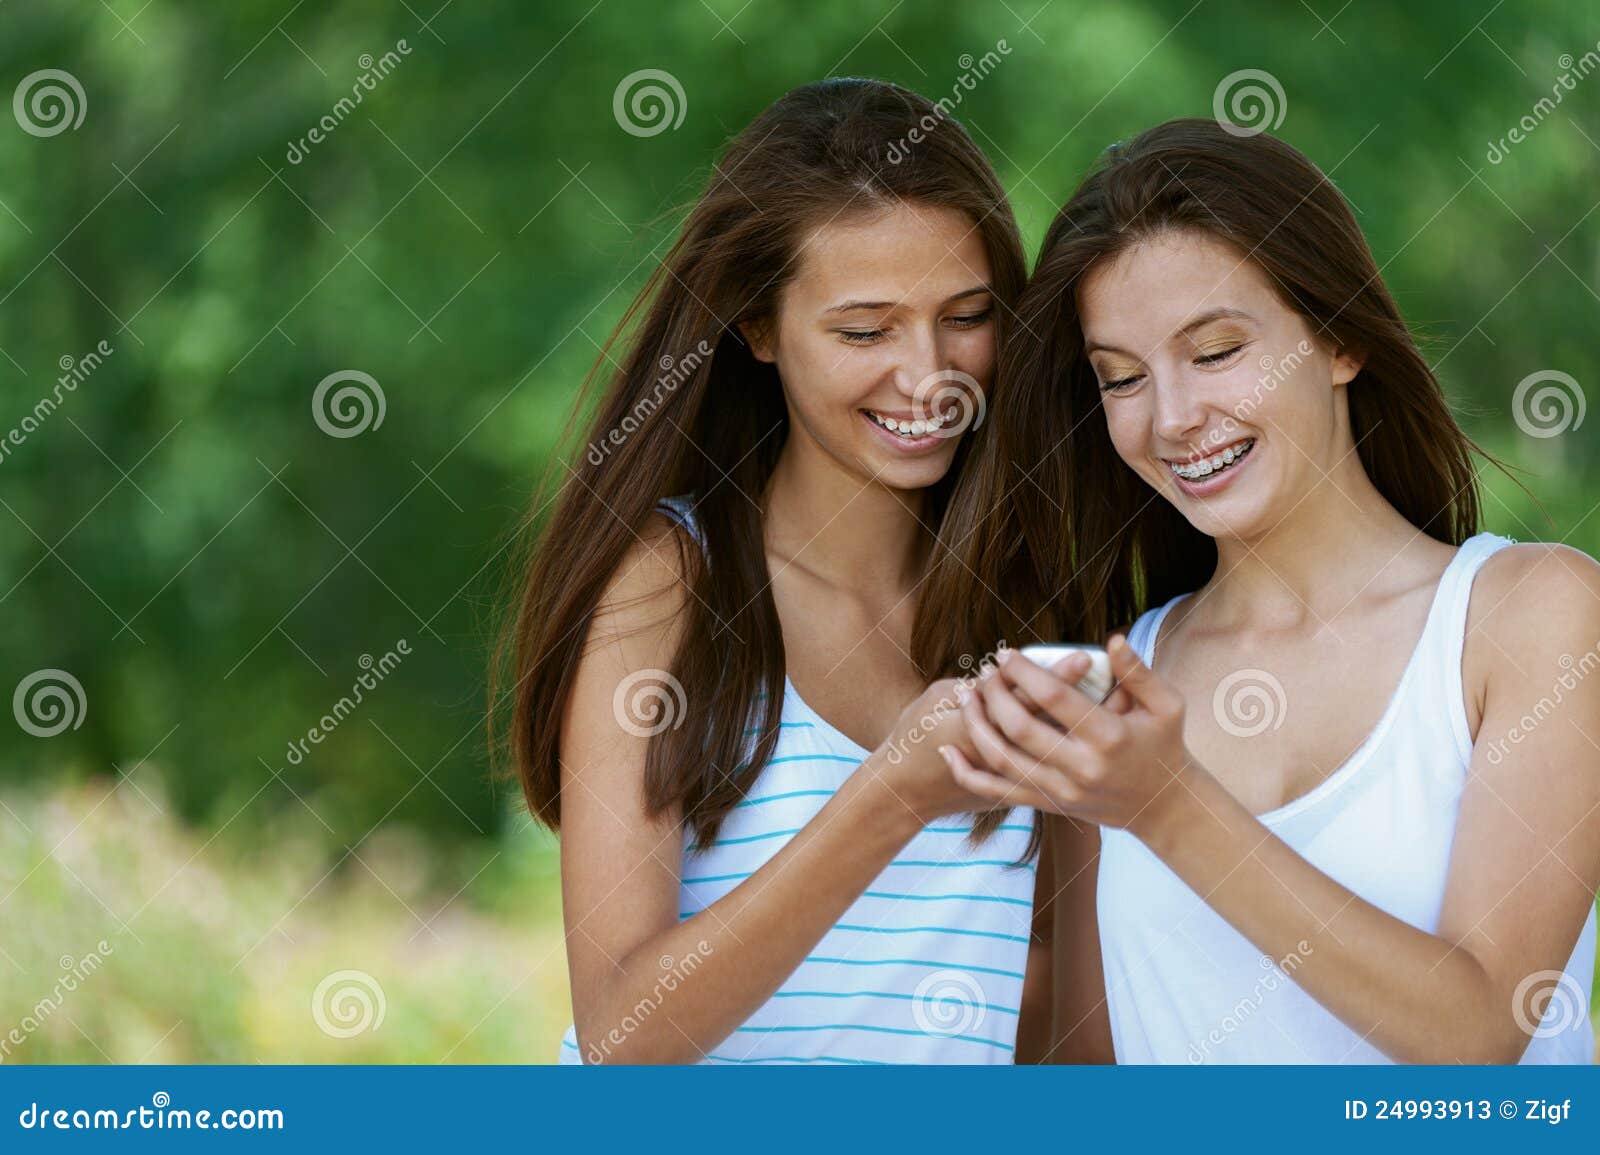 Two Charming Girls Reads Message Stock Image - Image of mobile ...